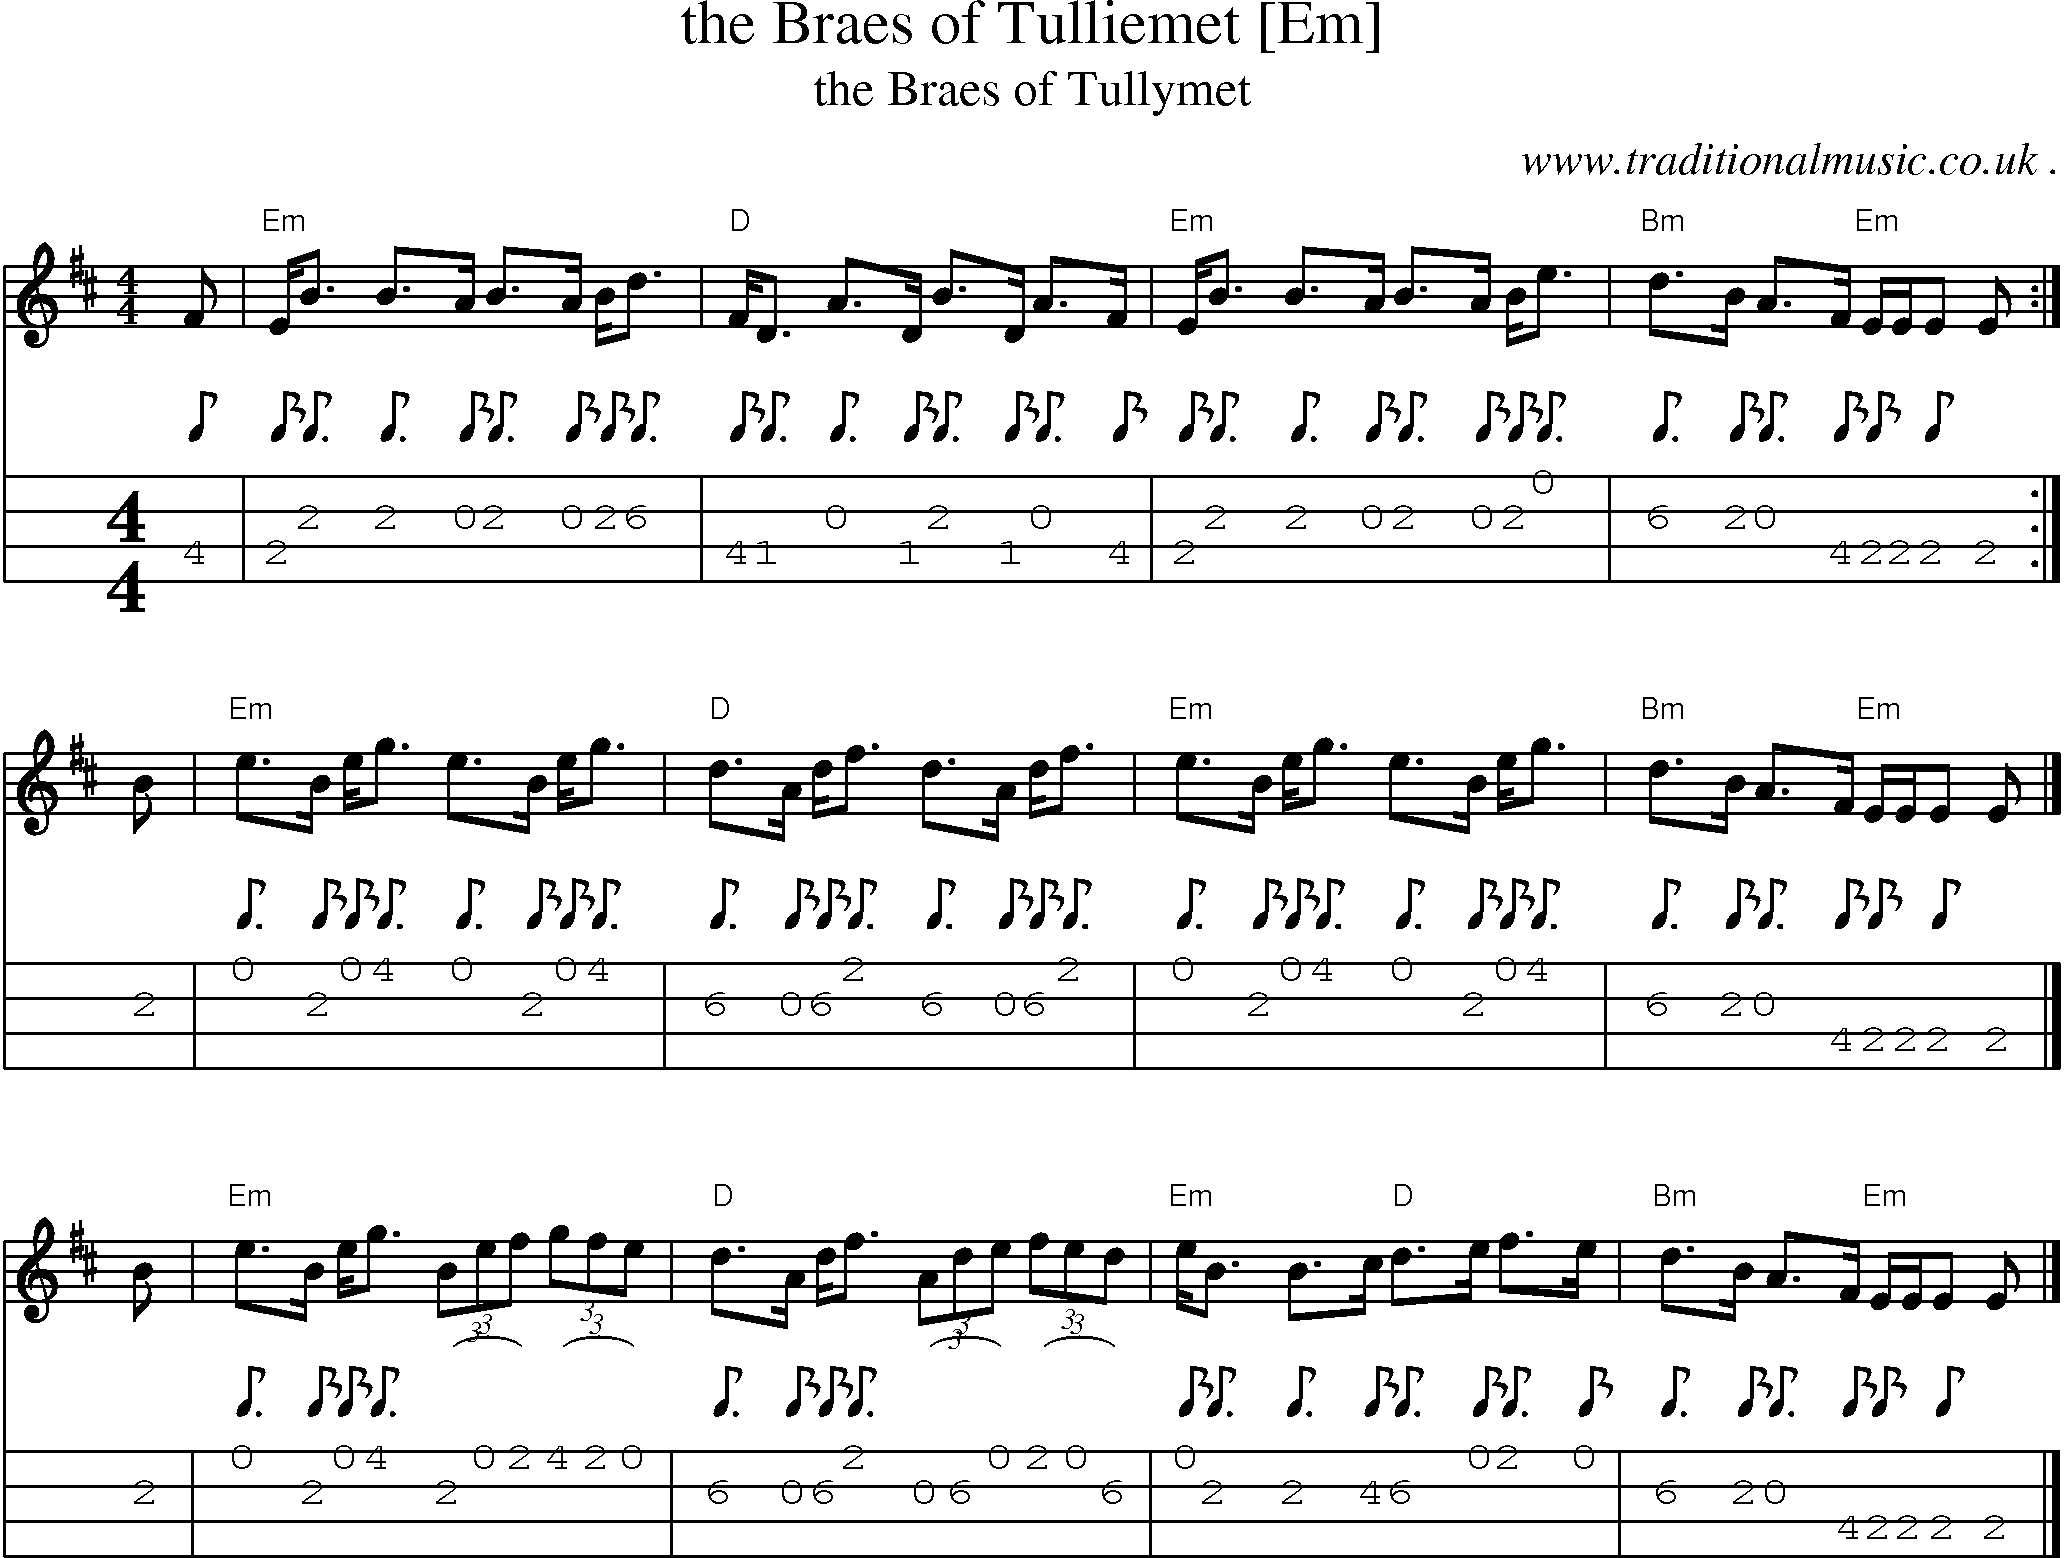 Sheet-music  score, Chords and Mandolin Tabs for The Braes Of Tulliemet [em]